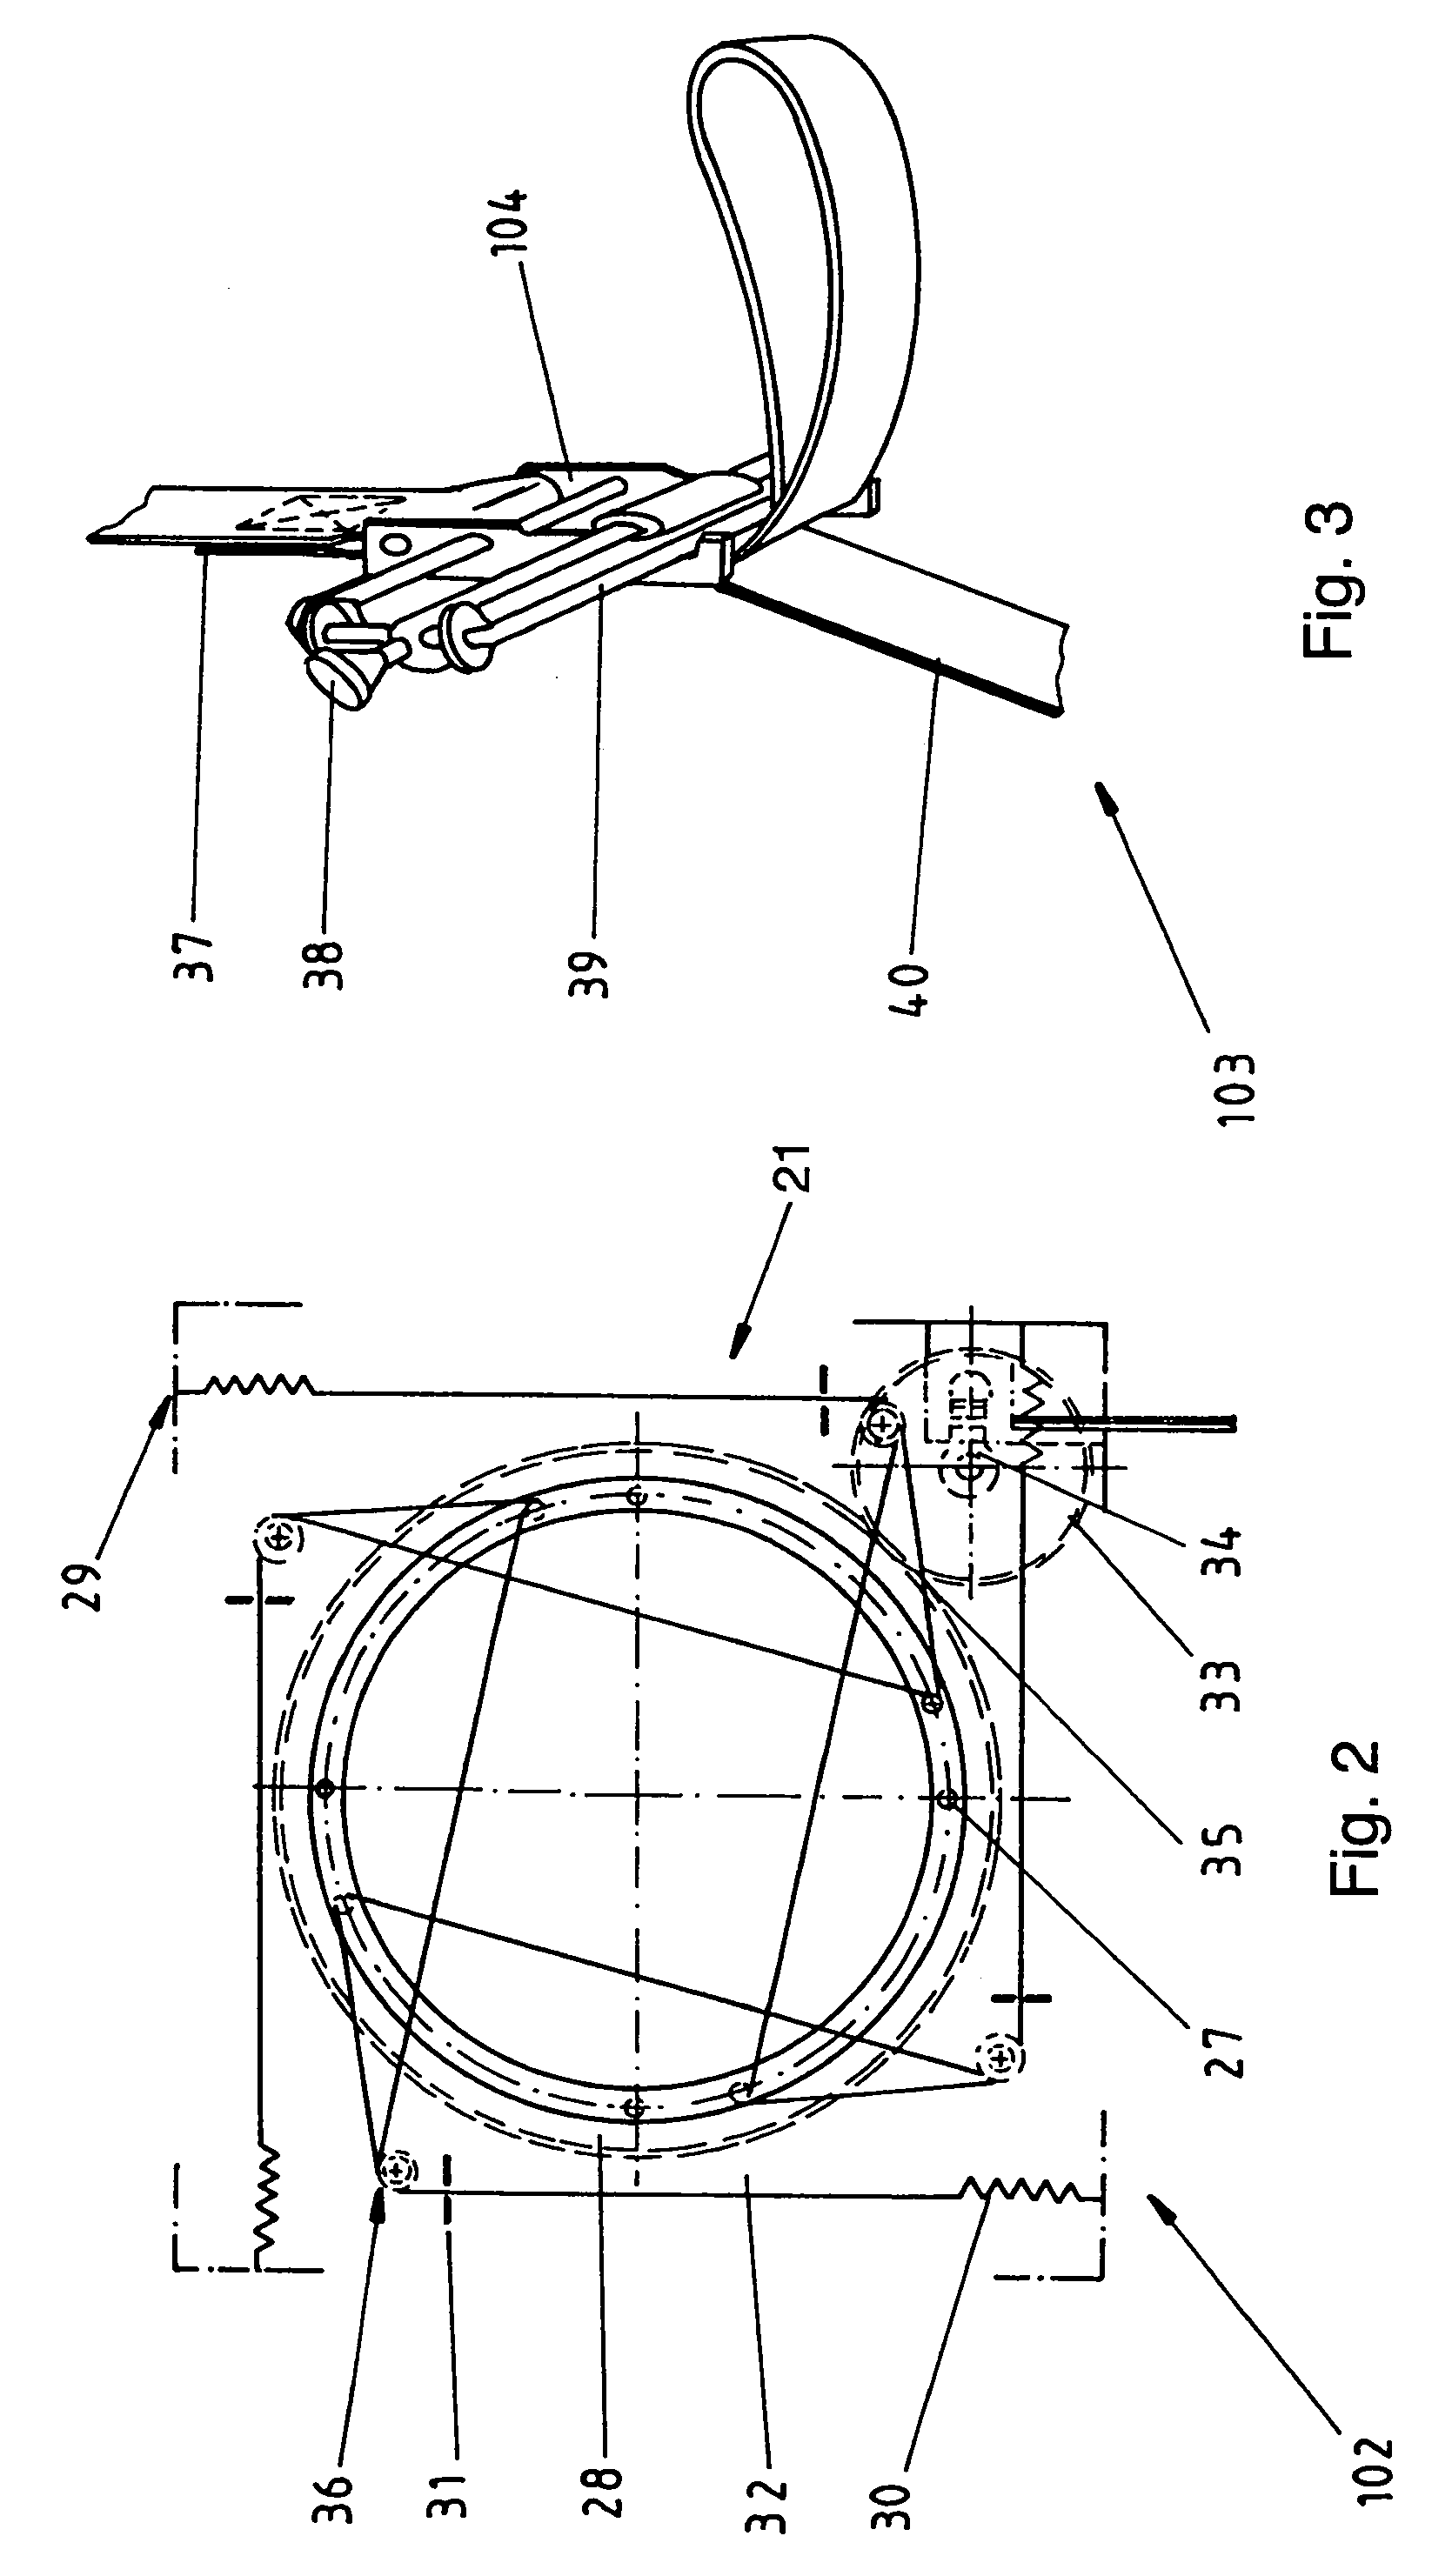 Device for large-volume containers